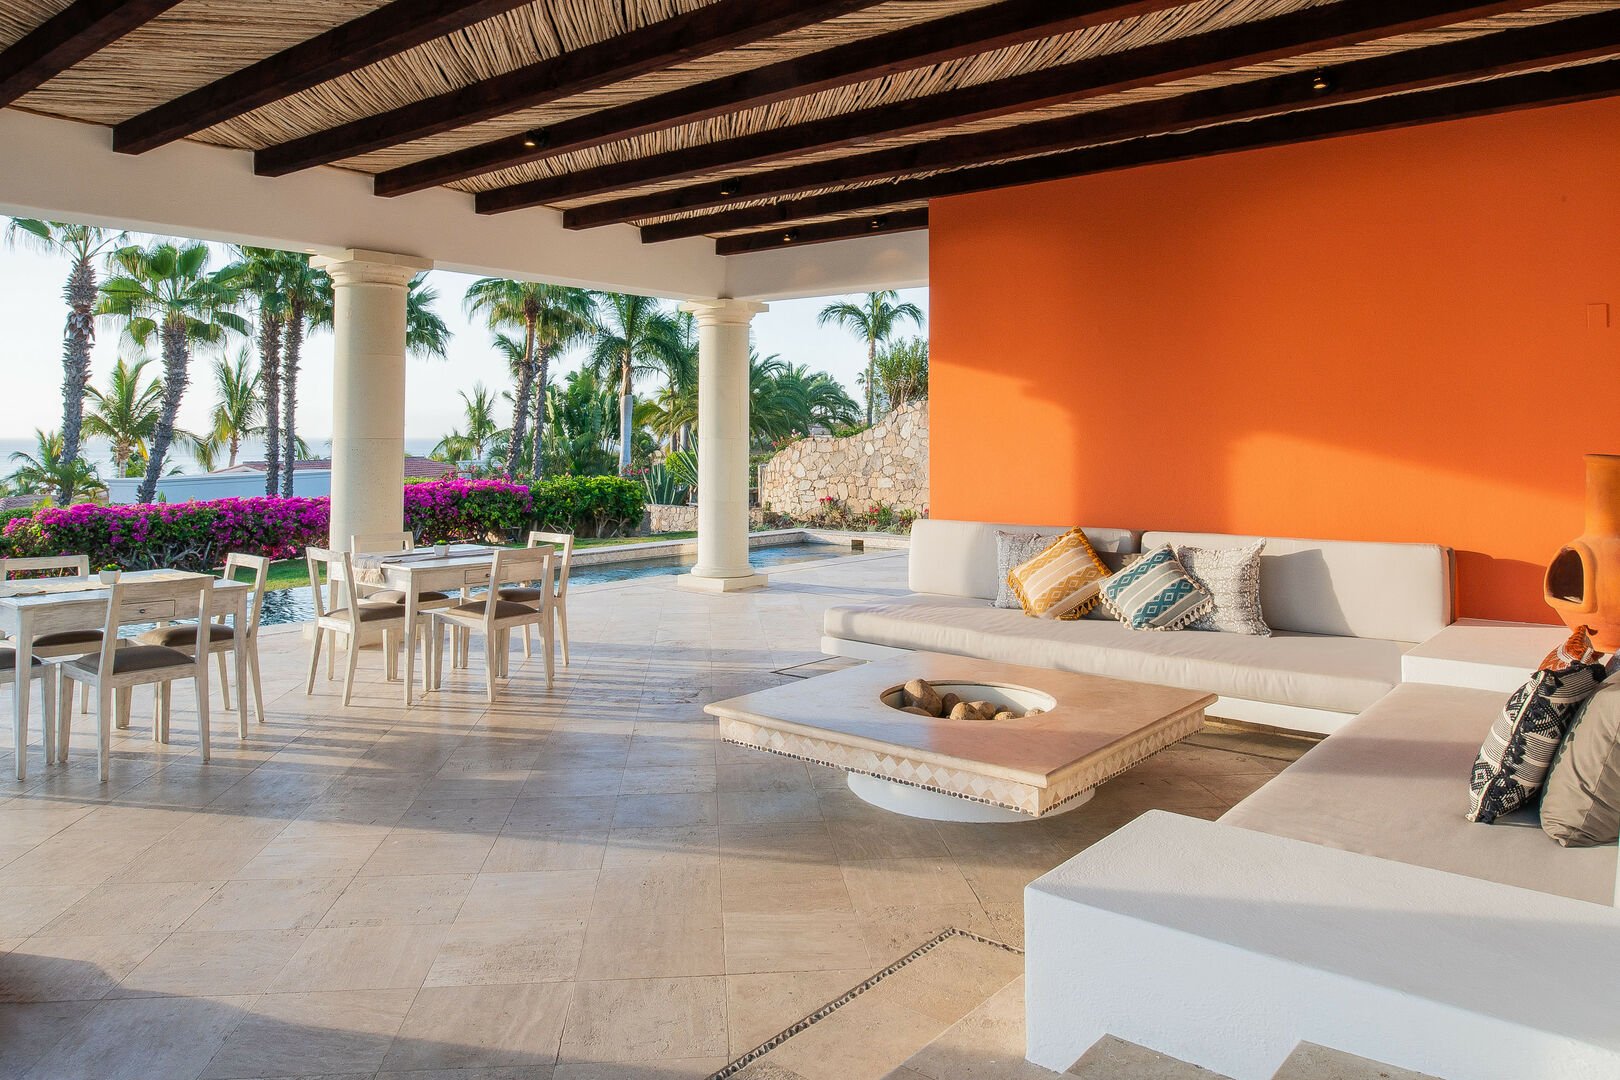 A large outside lounge area of this luxury Los Cabos villa.